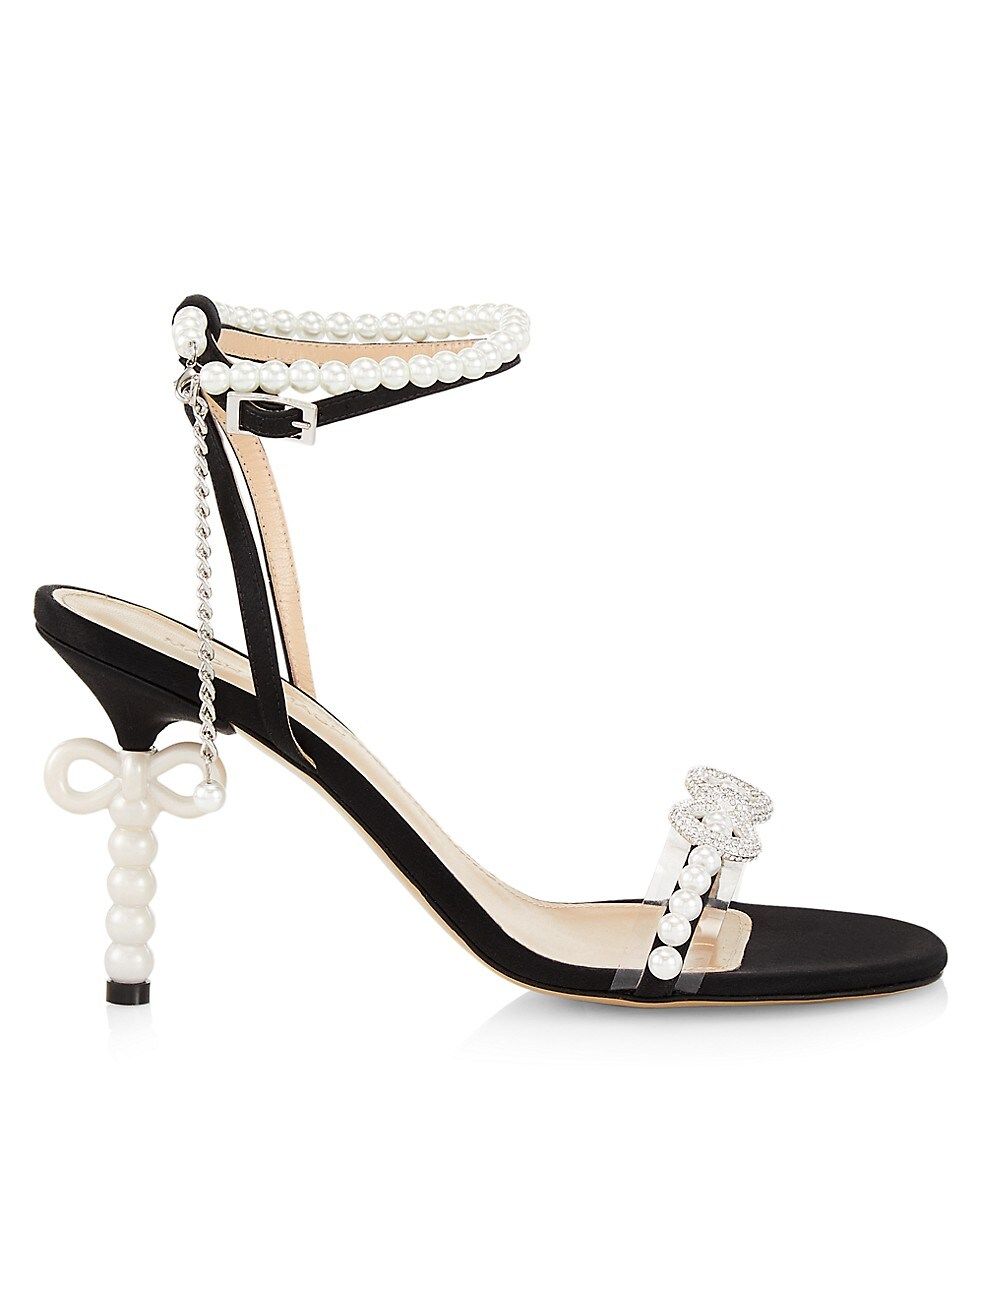 MACH & MACH Faux Pearl-Embellished Satin Sandals | Saks Fifth Avenue